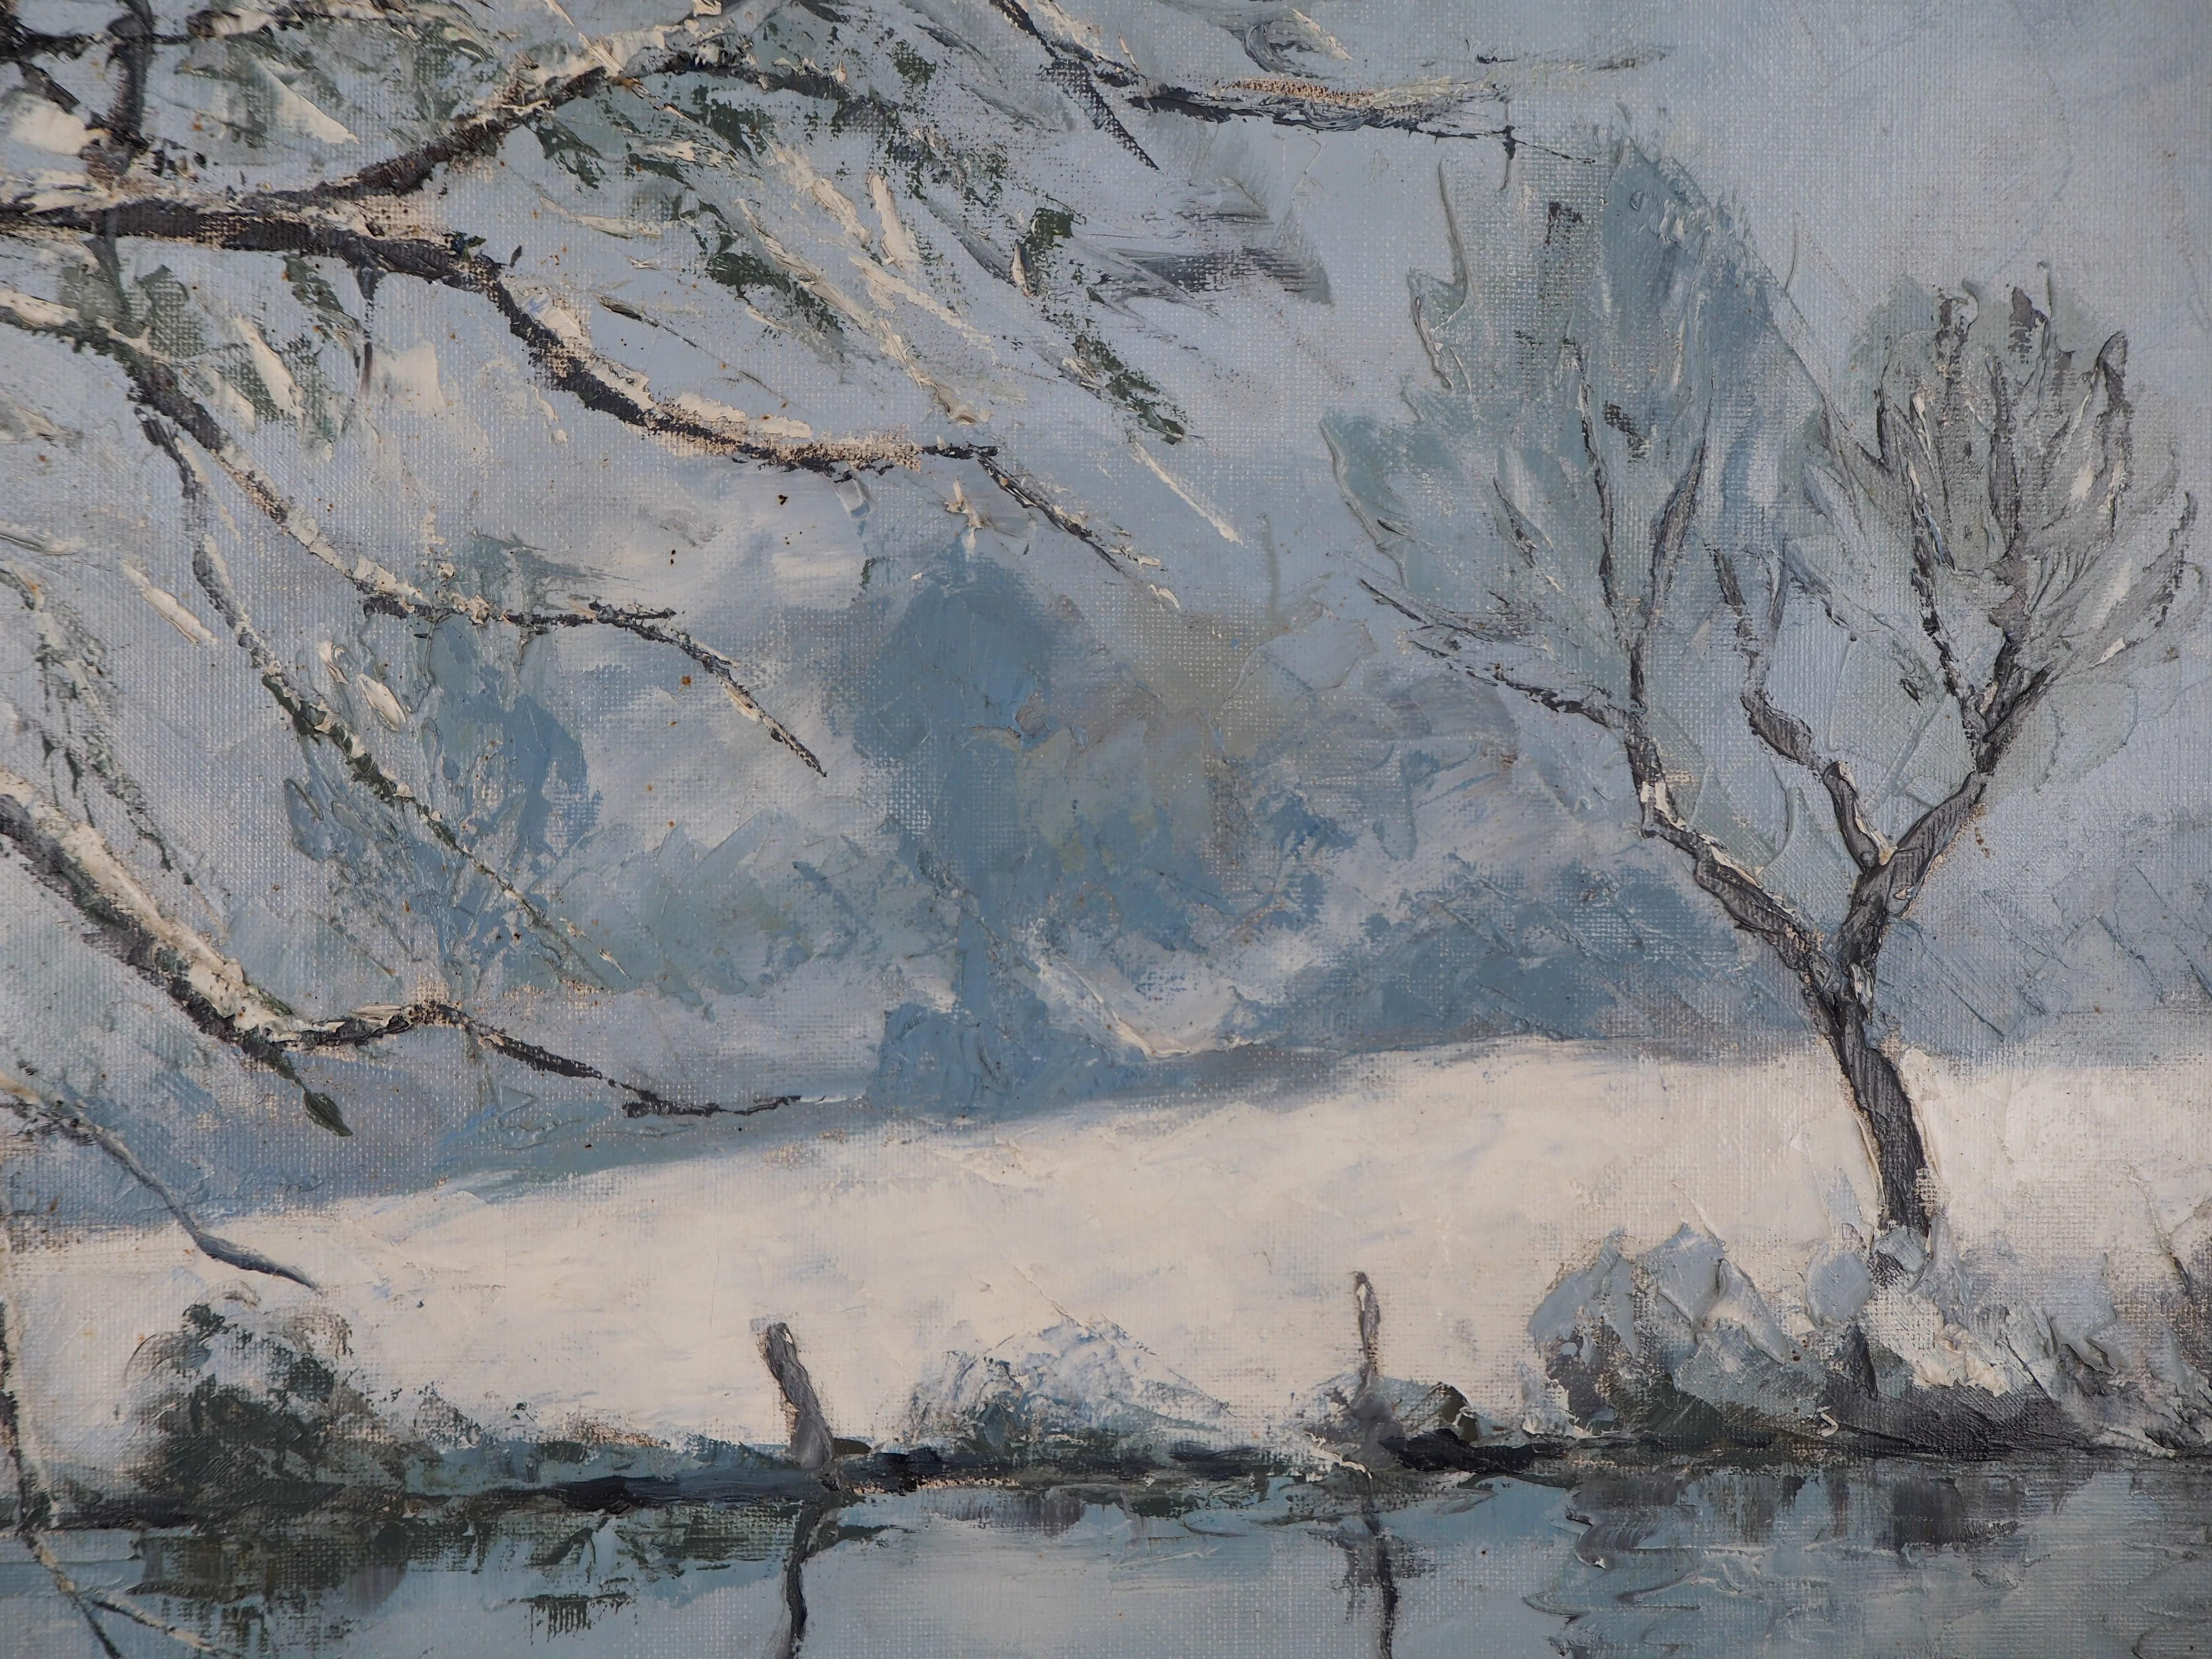 Normandy : Frozen Lake and Snow - Original oil on canvas, Handsigned 3